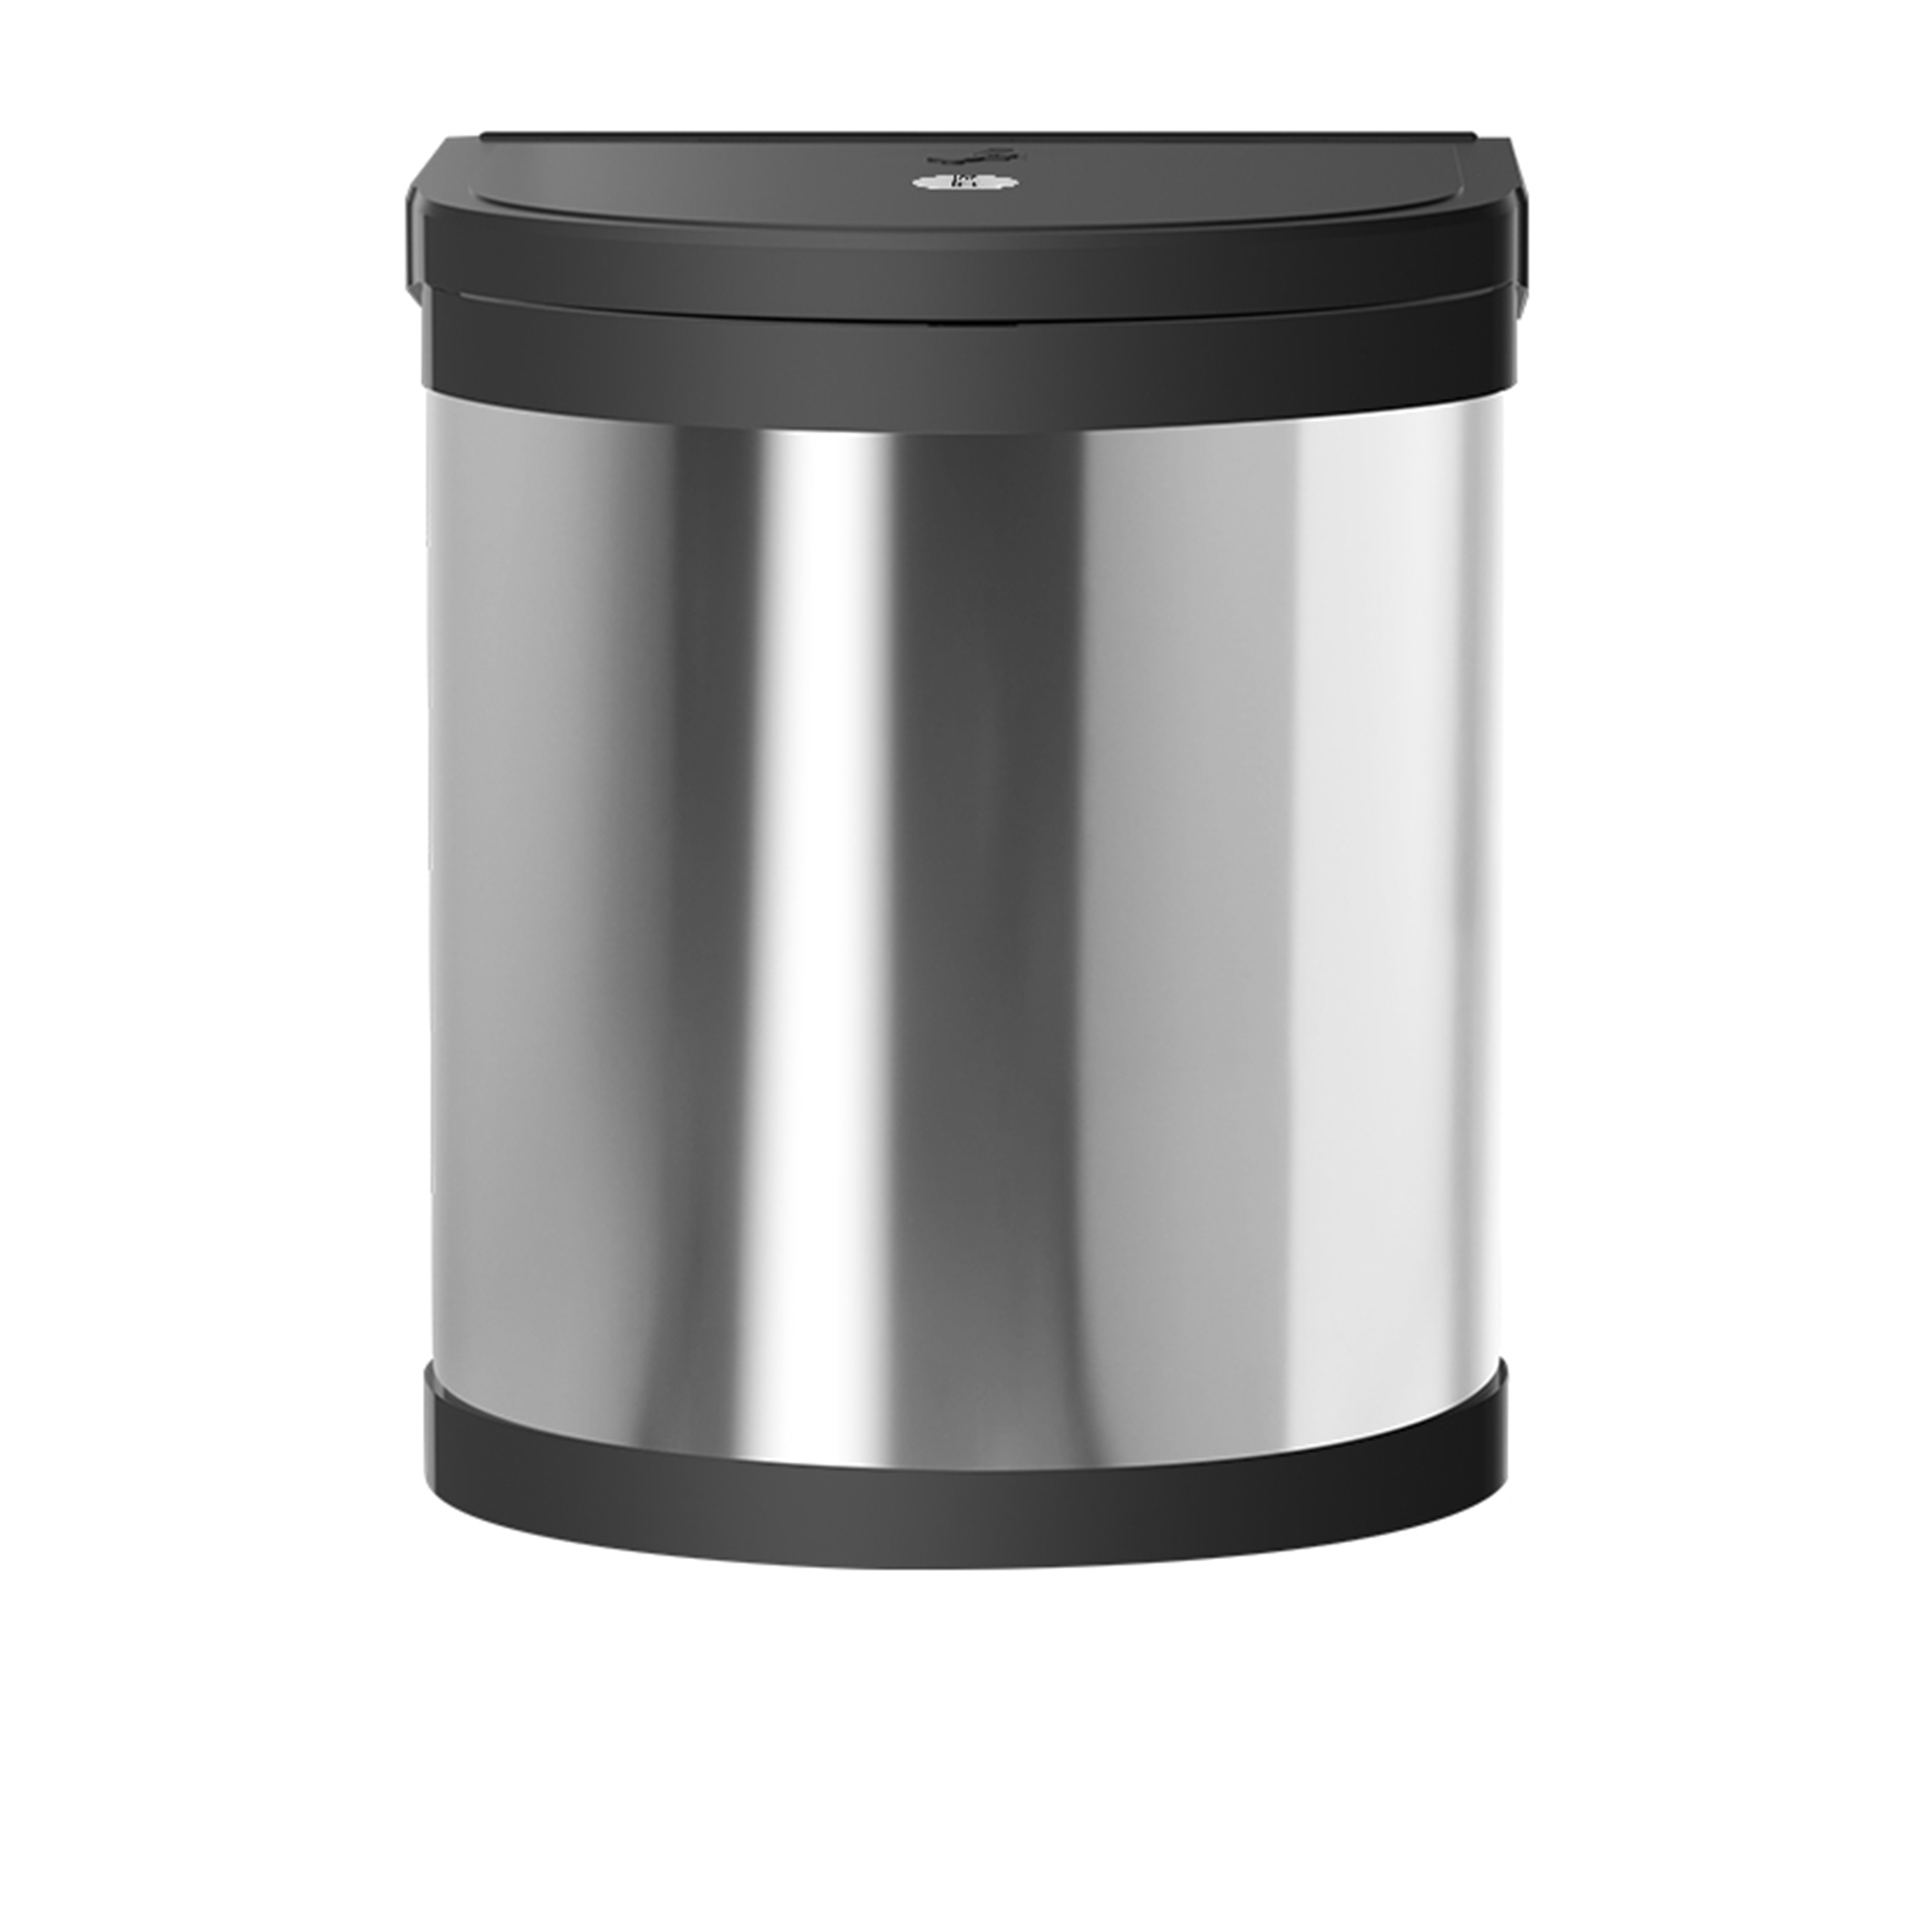 Cefito Stainless Steel Pull Out Bin 12L Image 1